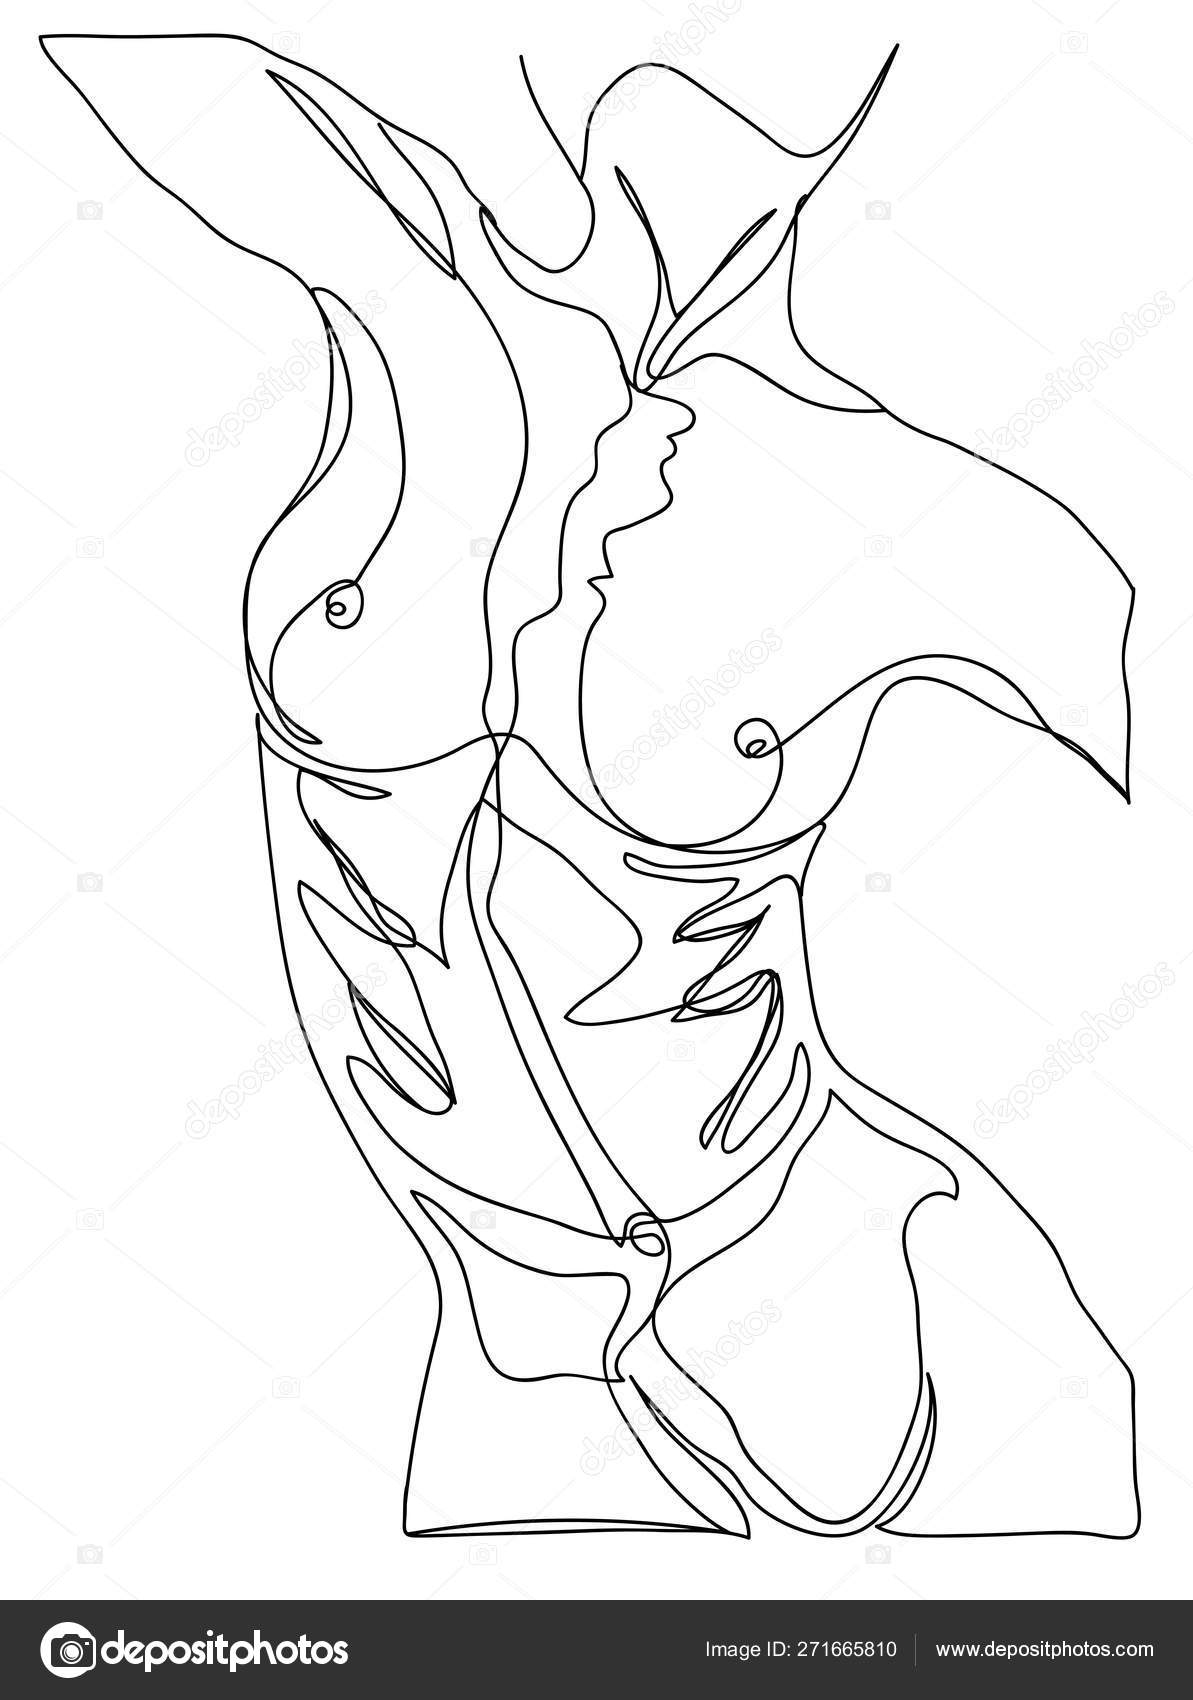 One Line Drawing Sketch Illustration Woman Modern Single Line Art Vector Image By C Olgasl Vector Stock 271665810 Printable sticker images stock photos vectors shutterstock www.shutterstock.com. one line drawing sketch illustration woman modern single line art vector image by c olgasl vector stock 271665810